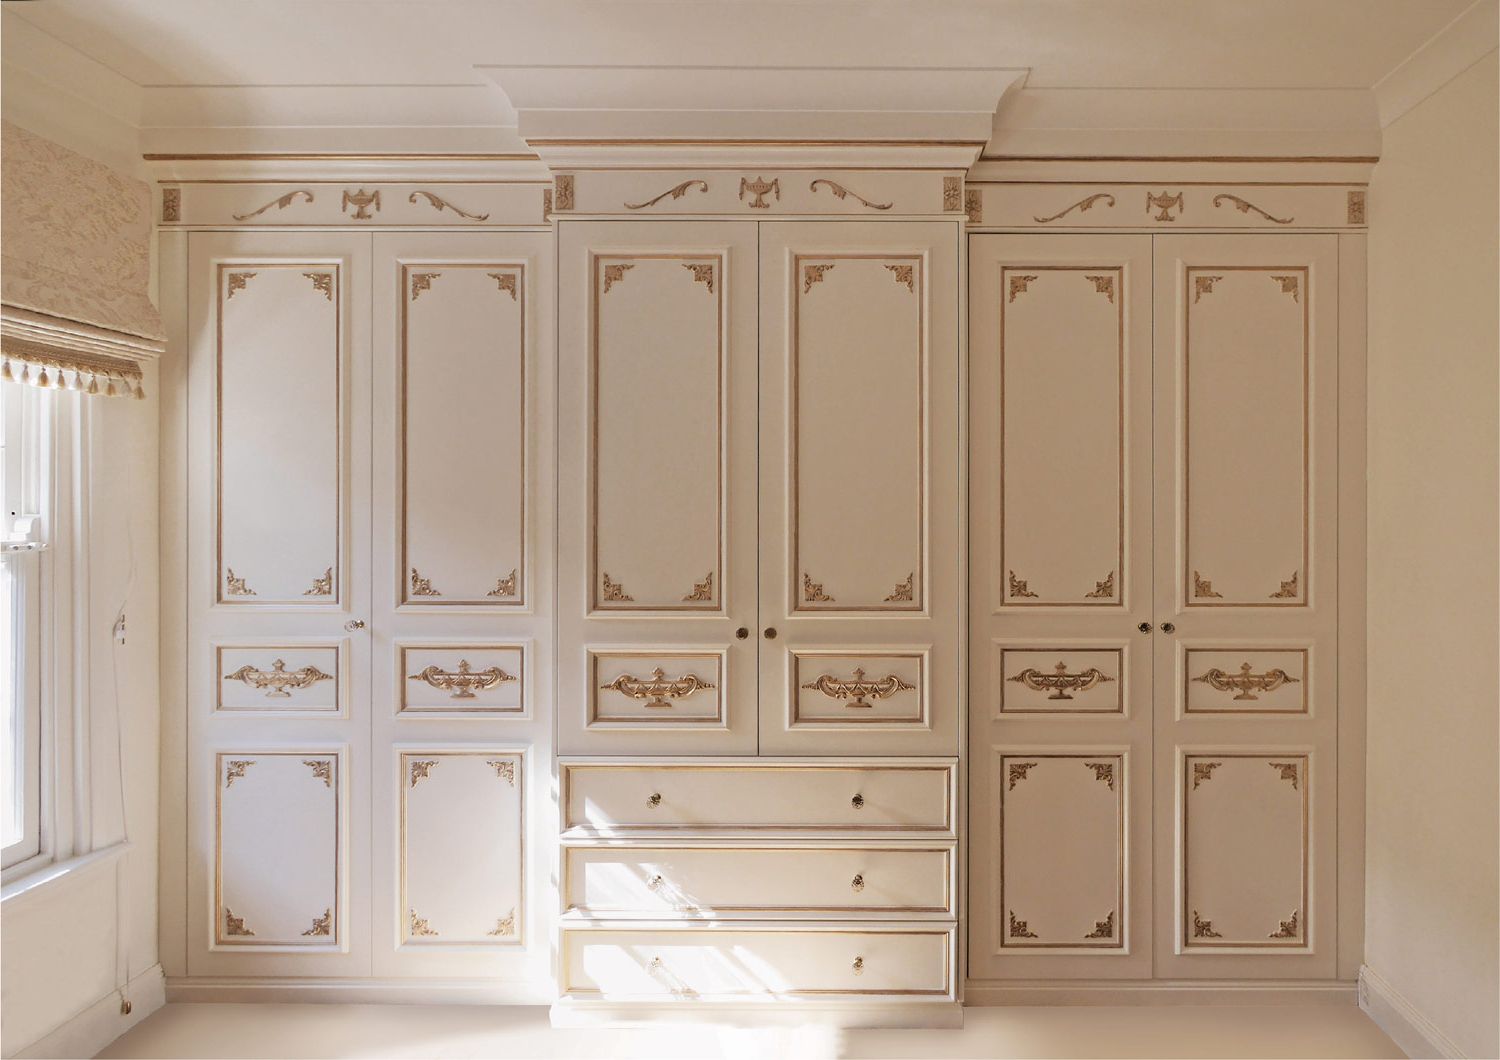 Breathtaking French Wardrobe Designs | Custom Made | Luxury Finishes Throughout French Style Fitted Wardrobes (Gallery 1 of 20)